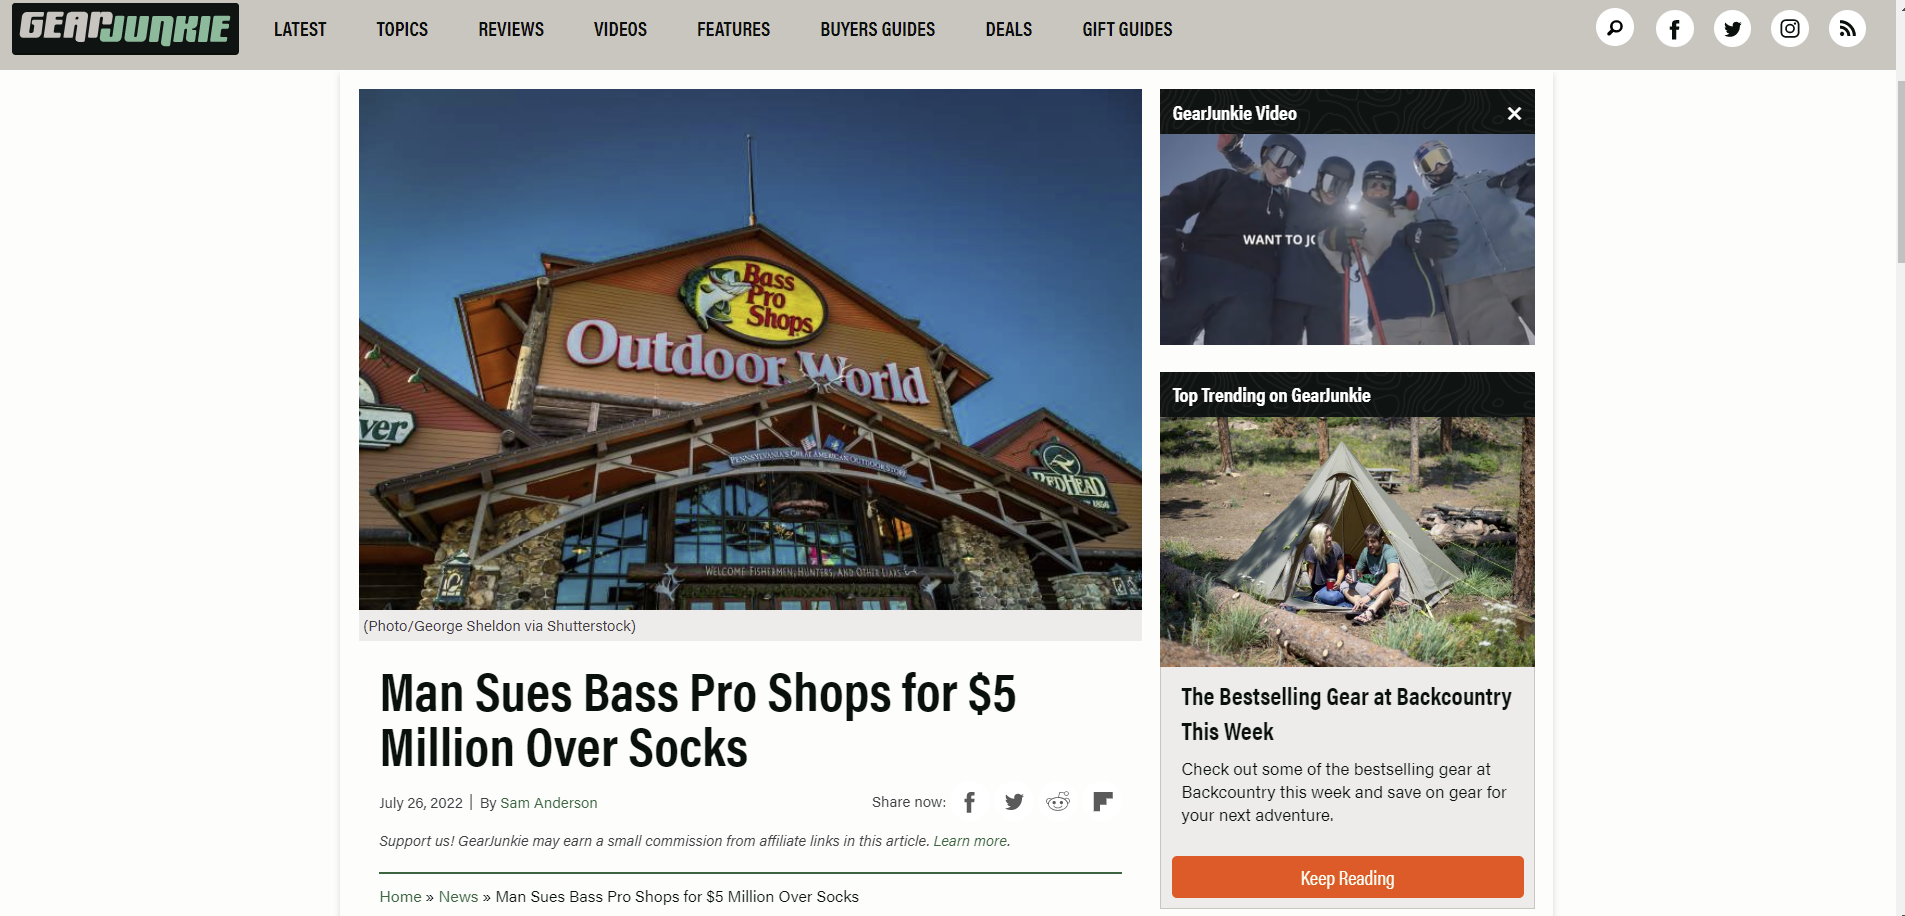 GearJunkie Uses George Sheldon Photo of Bass Pro Shops for News Story